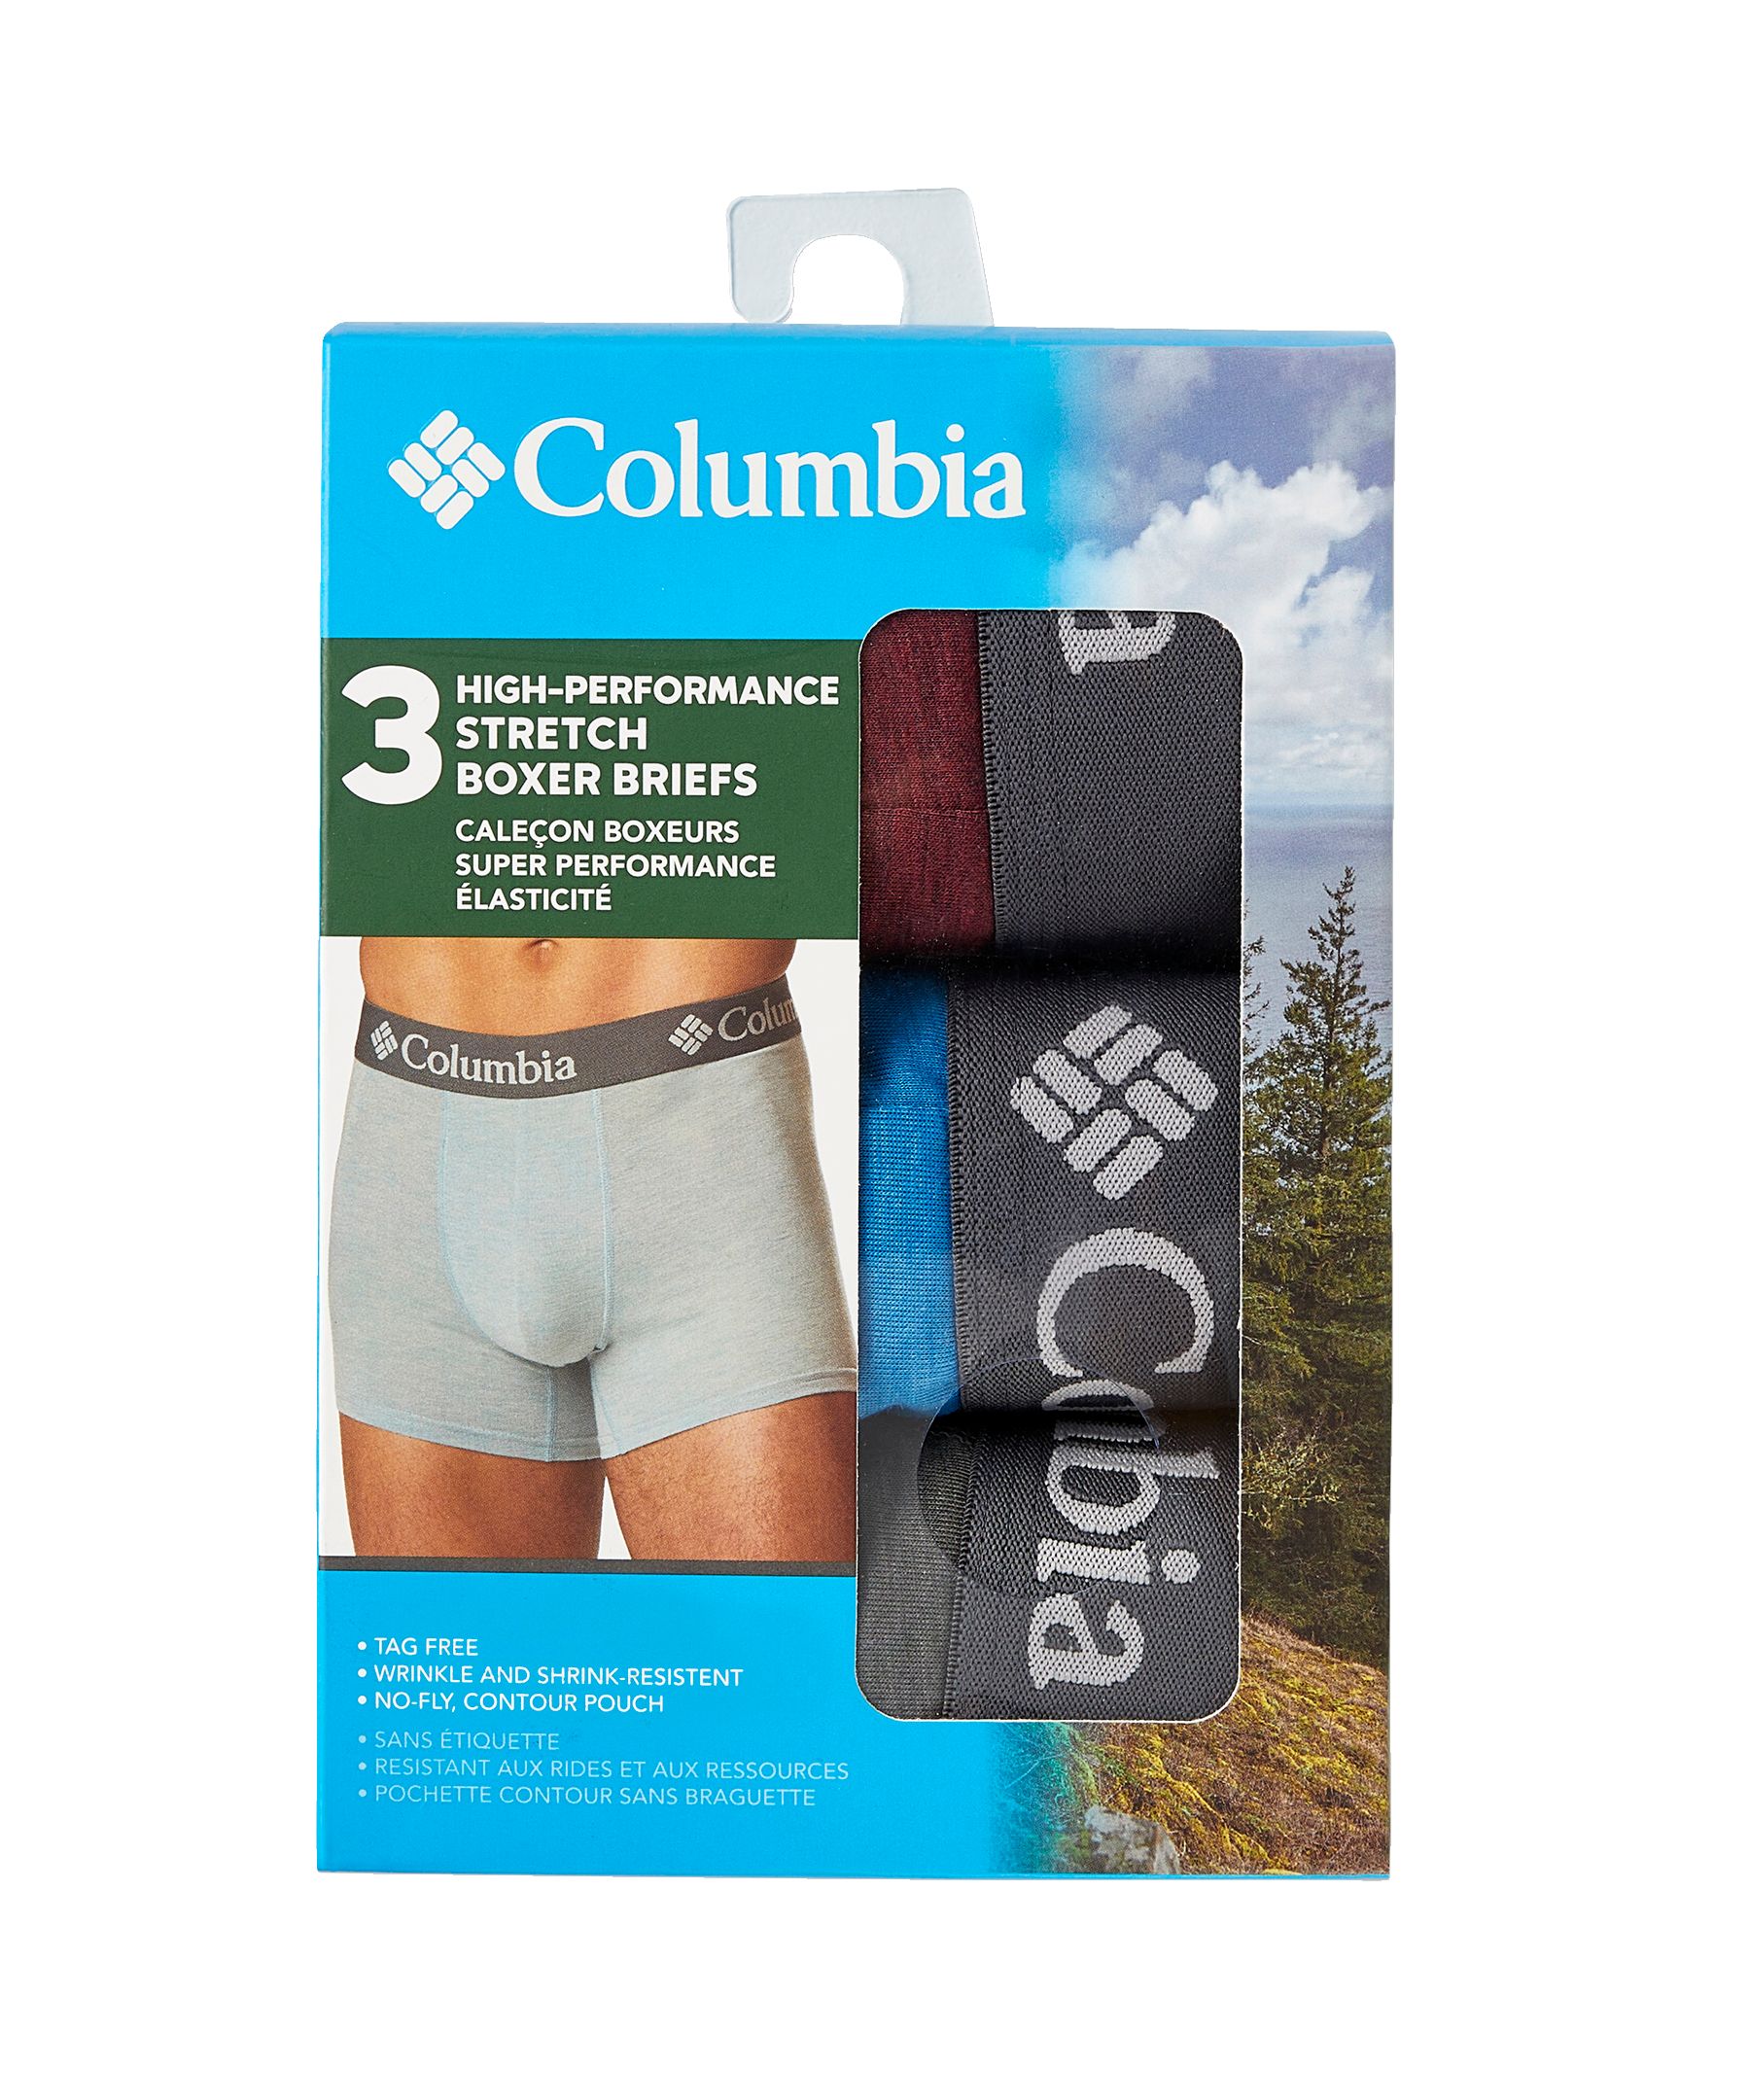 https://media-www.marks.com/product/marks-work-wearhouse/industrial-world/mens-underwear-and-loungewear/410036441898/columbia-performance-stretch-boxers-99458a81-64b2-425c-8cd5-78513e23c027-jpgrendition.jpg?imdensity=1&imwidth=1244&impolicy=mZoom